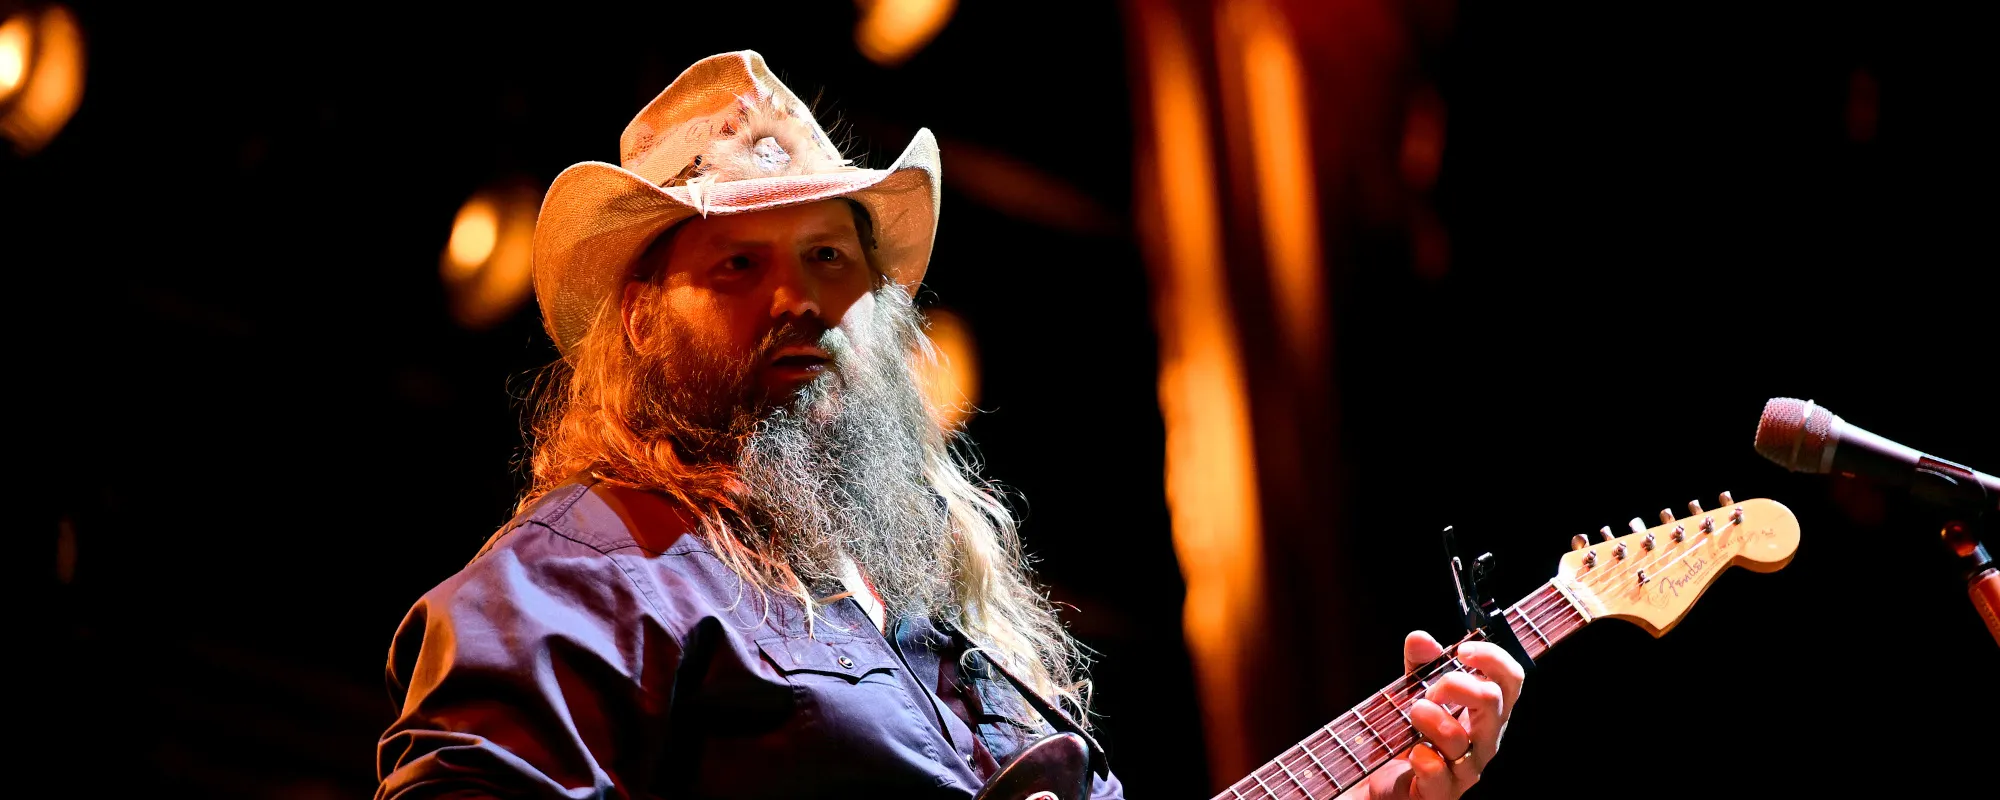 5 Songs You Didn’t Know Chris Stapleton Wrote for Other Artists